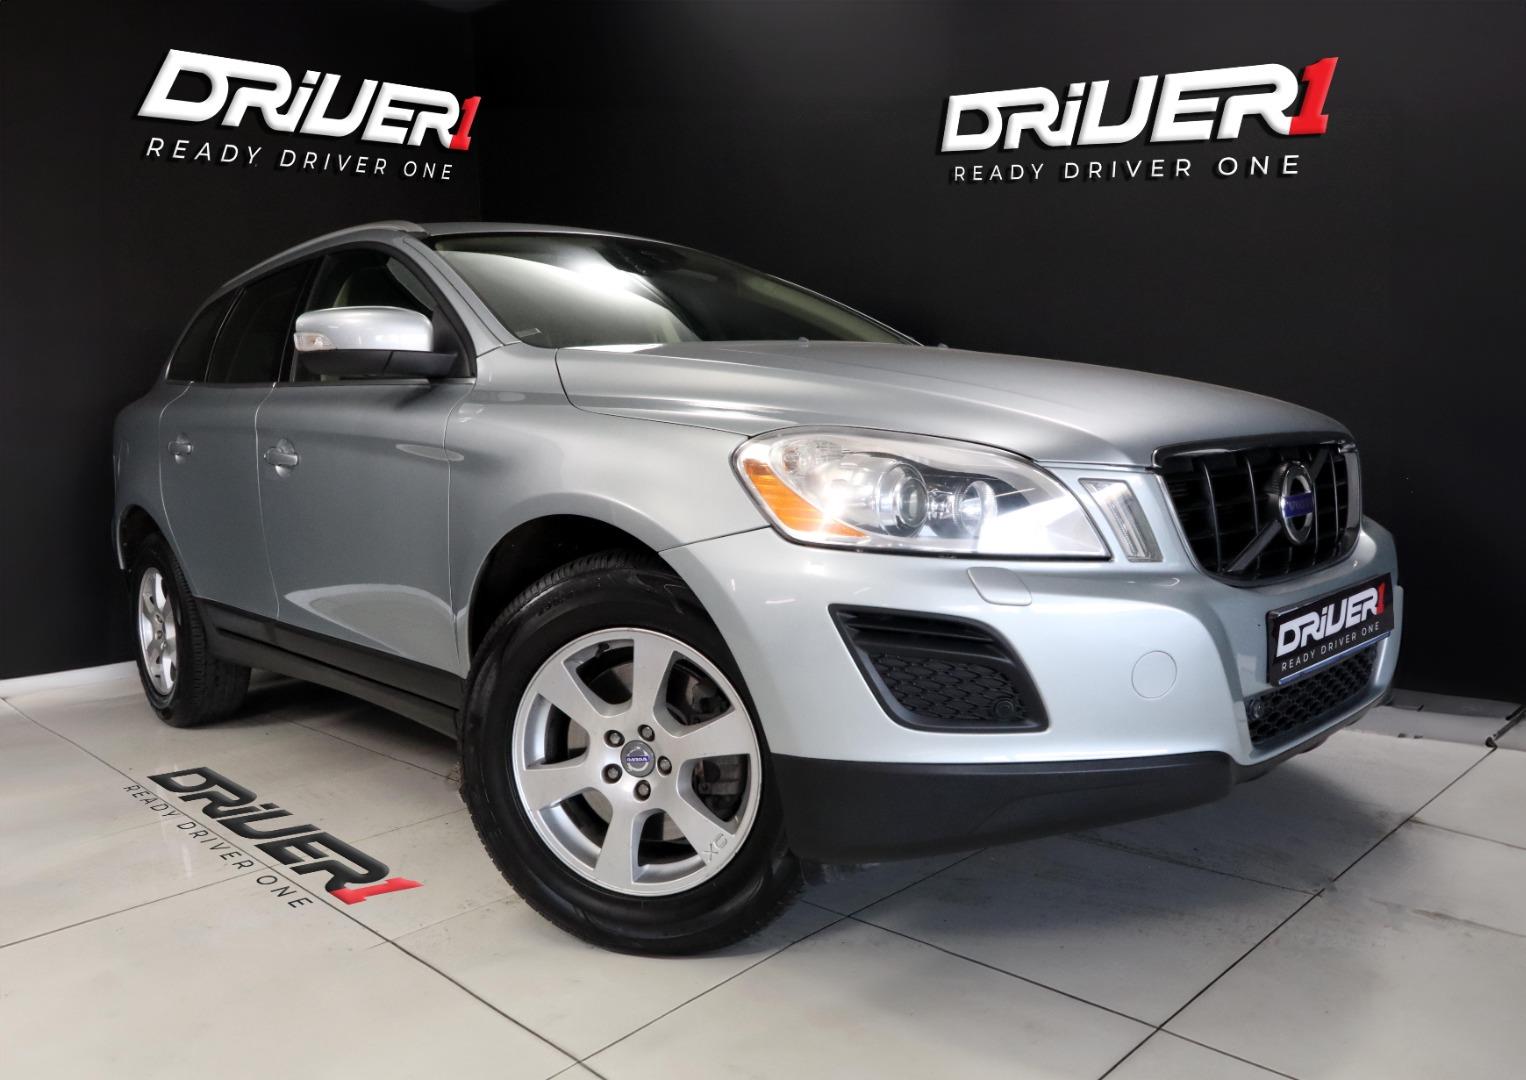 2011 Volvo Xc60 2.0T Fwd powershift for sale - 343491